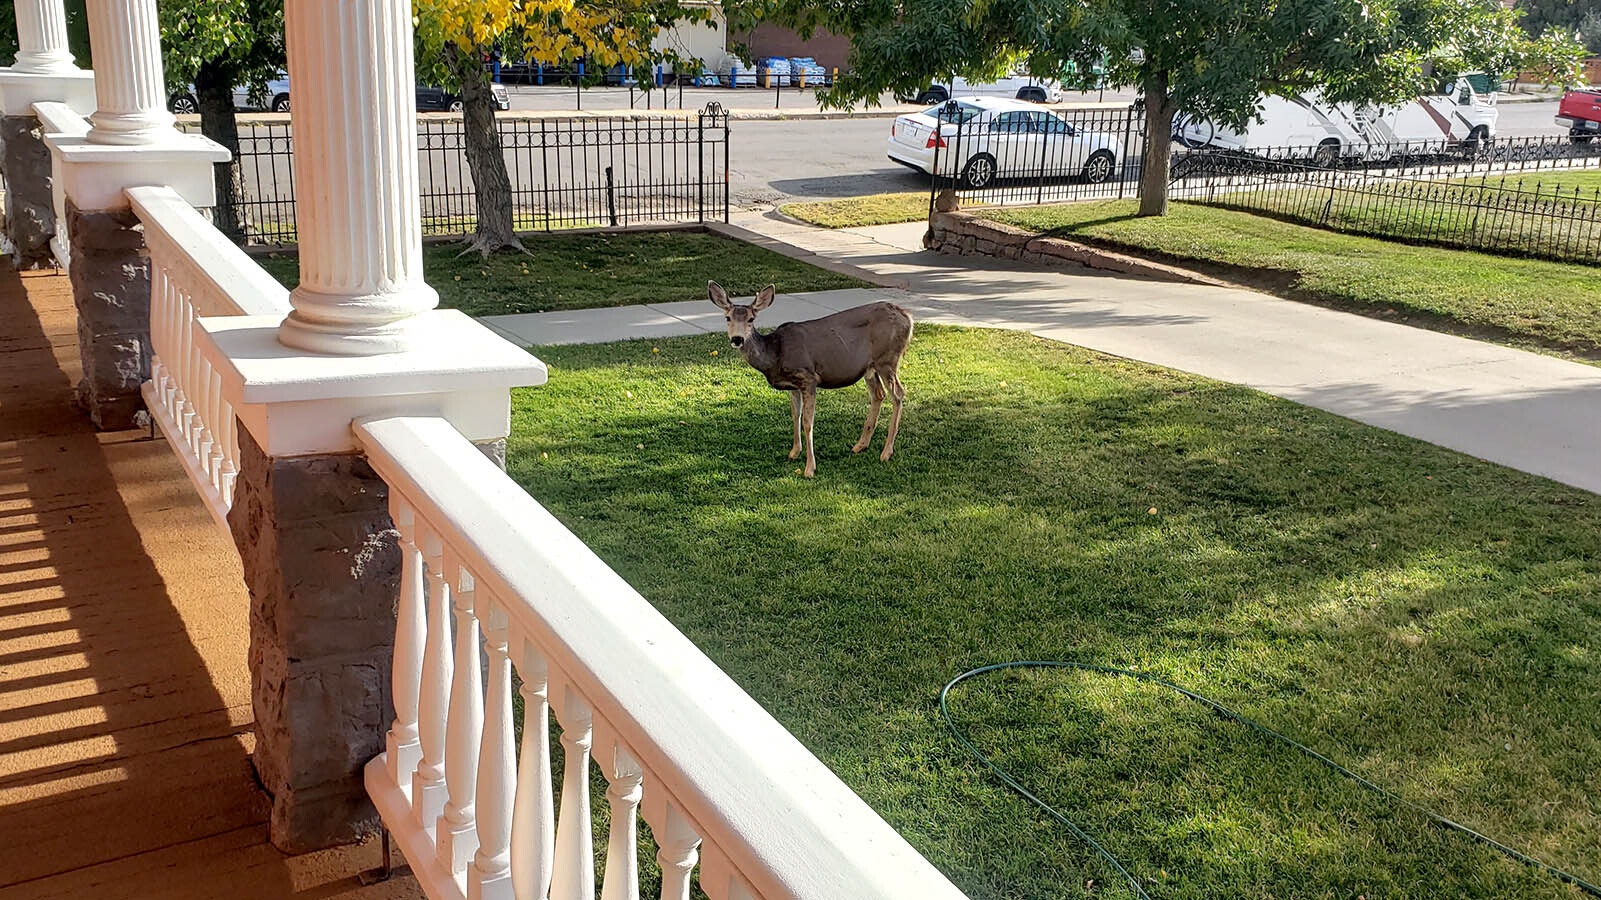 The deer don't find Rawlins a bad place to live at all. This one was in the front yard of the Ferris Mansion happily nibbling on grass.